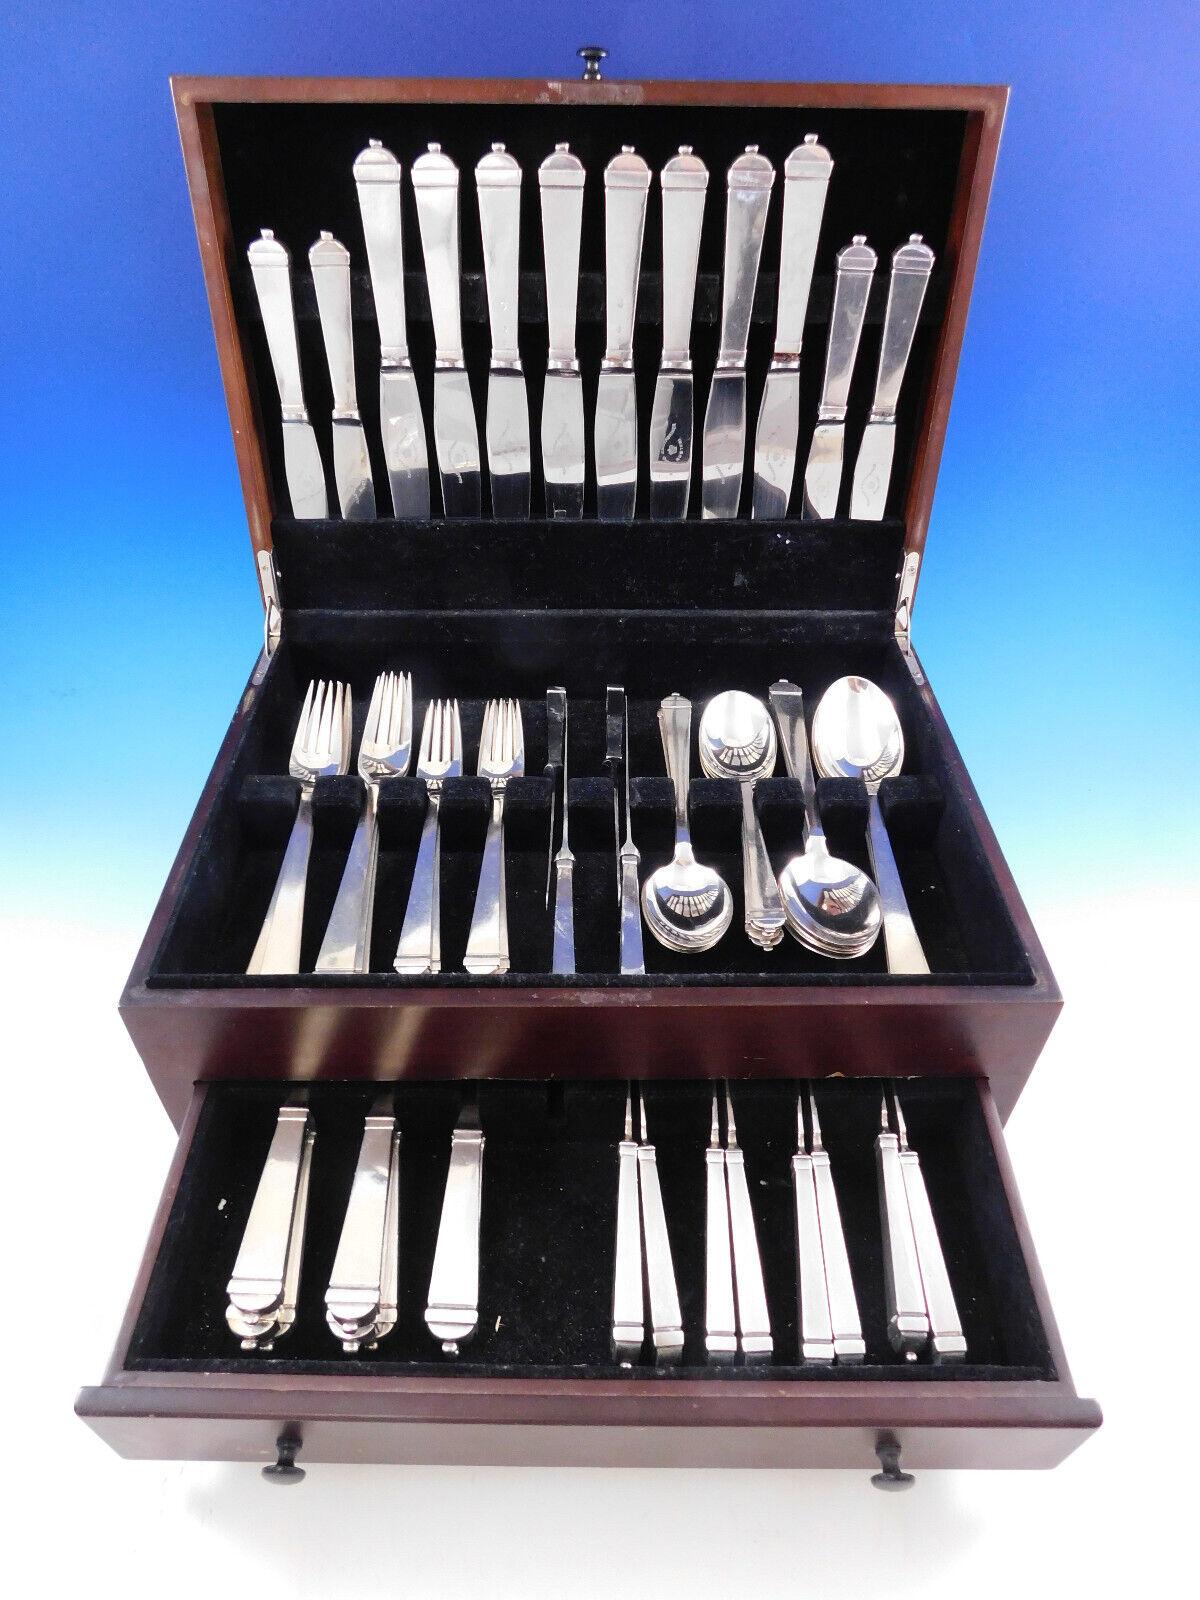 S. Christian Fogh, a Danish silversmith, operated a workshop in Copenhagen, Denmark, from 1947-1973. He was known for his unique jewelry and flatware creations.

Rare Renaissance by Fogh of Denmark, circa 1950, Sterling Silver Flatware set - 64